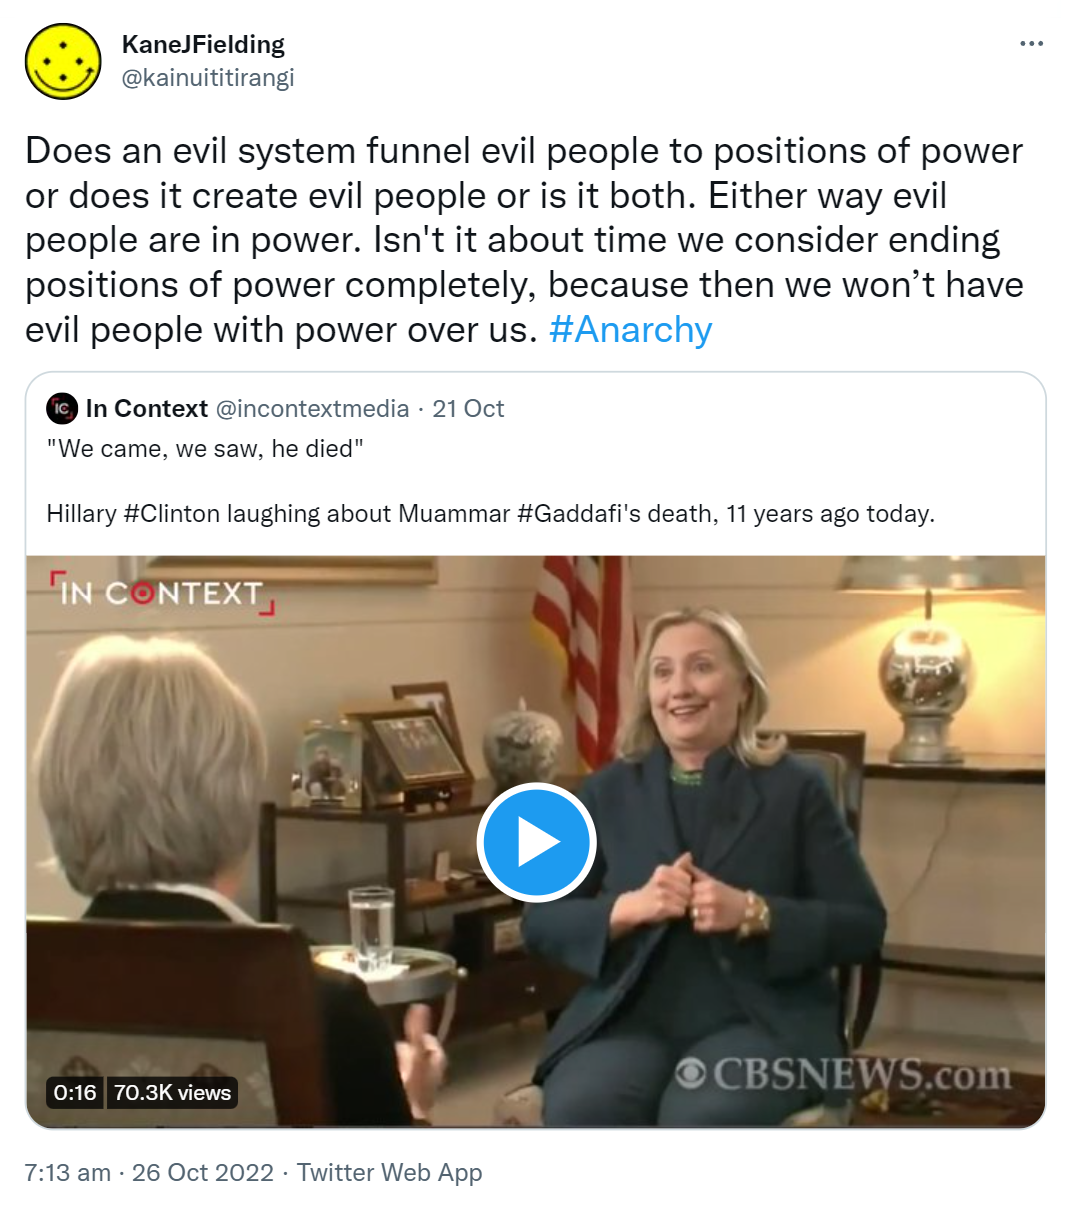 Does an evil system funnel evil people to positions of power or does it create evil people or is it both. Either way evil people are in power. Isn't it about time we consider ending positions of power completely, because then we won’t have evil people with power over us. Hashtag Anarchy. Quote Tweet. In Context @incontextmedia. We came, we saw, he died. Hillary hashtag Clinton laughing about Muammar Hashtag Gaddafi's death, 11 years ago today. 7:13 am · 26 Oct 2022.